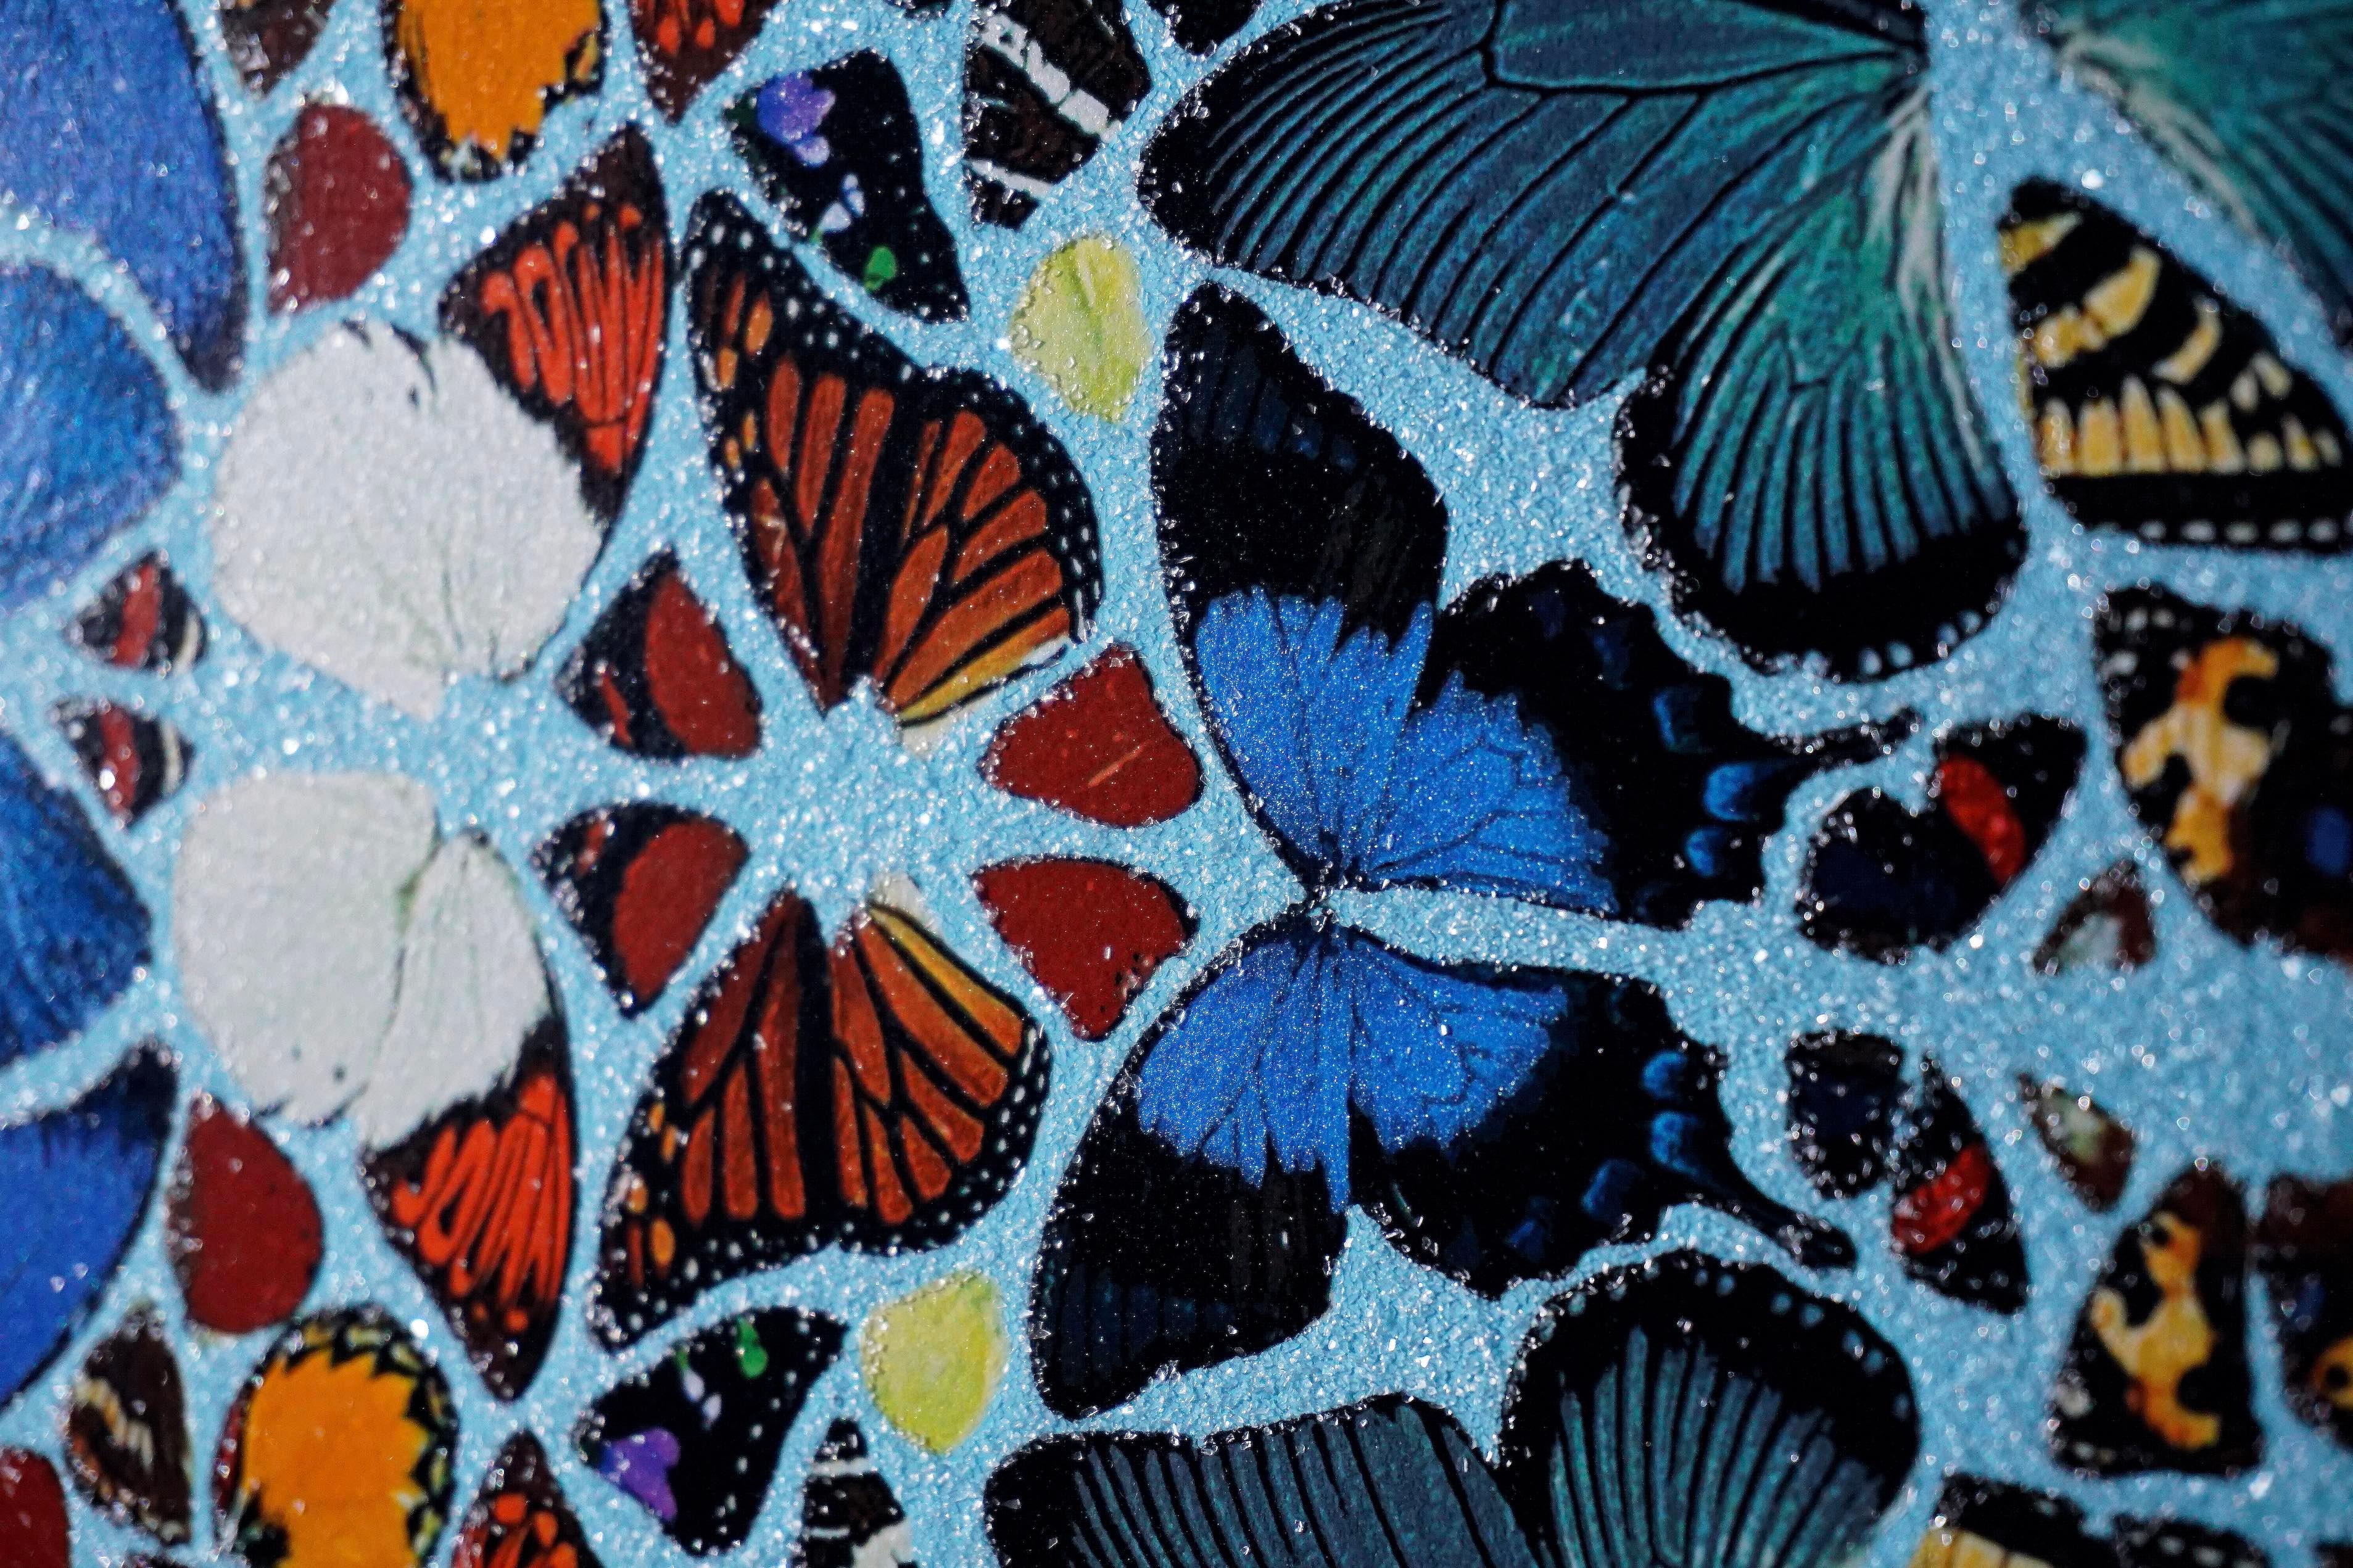 The grand ‘Mantra' butterfly wing kaleidoscope mandala with diamond dust by contemporary master artist, Damien Hirst, was created in 2011. The large-scale glittering artwork is a silkscreen print with layers of genuine diamond dust and is the